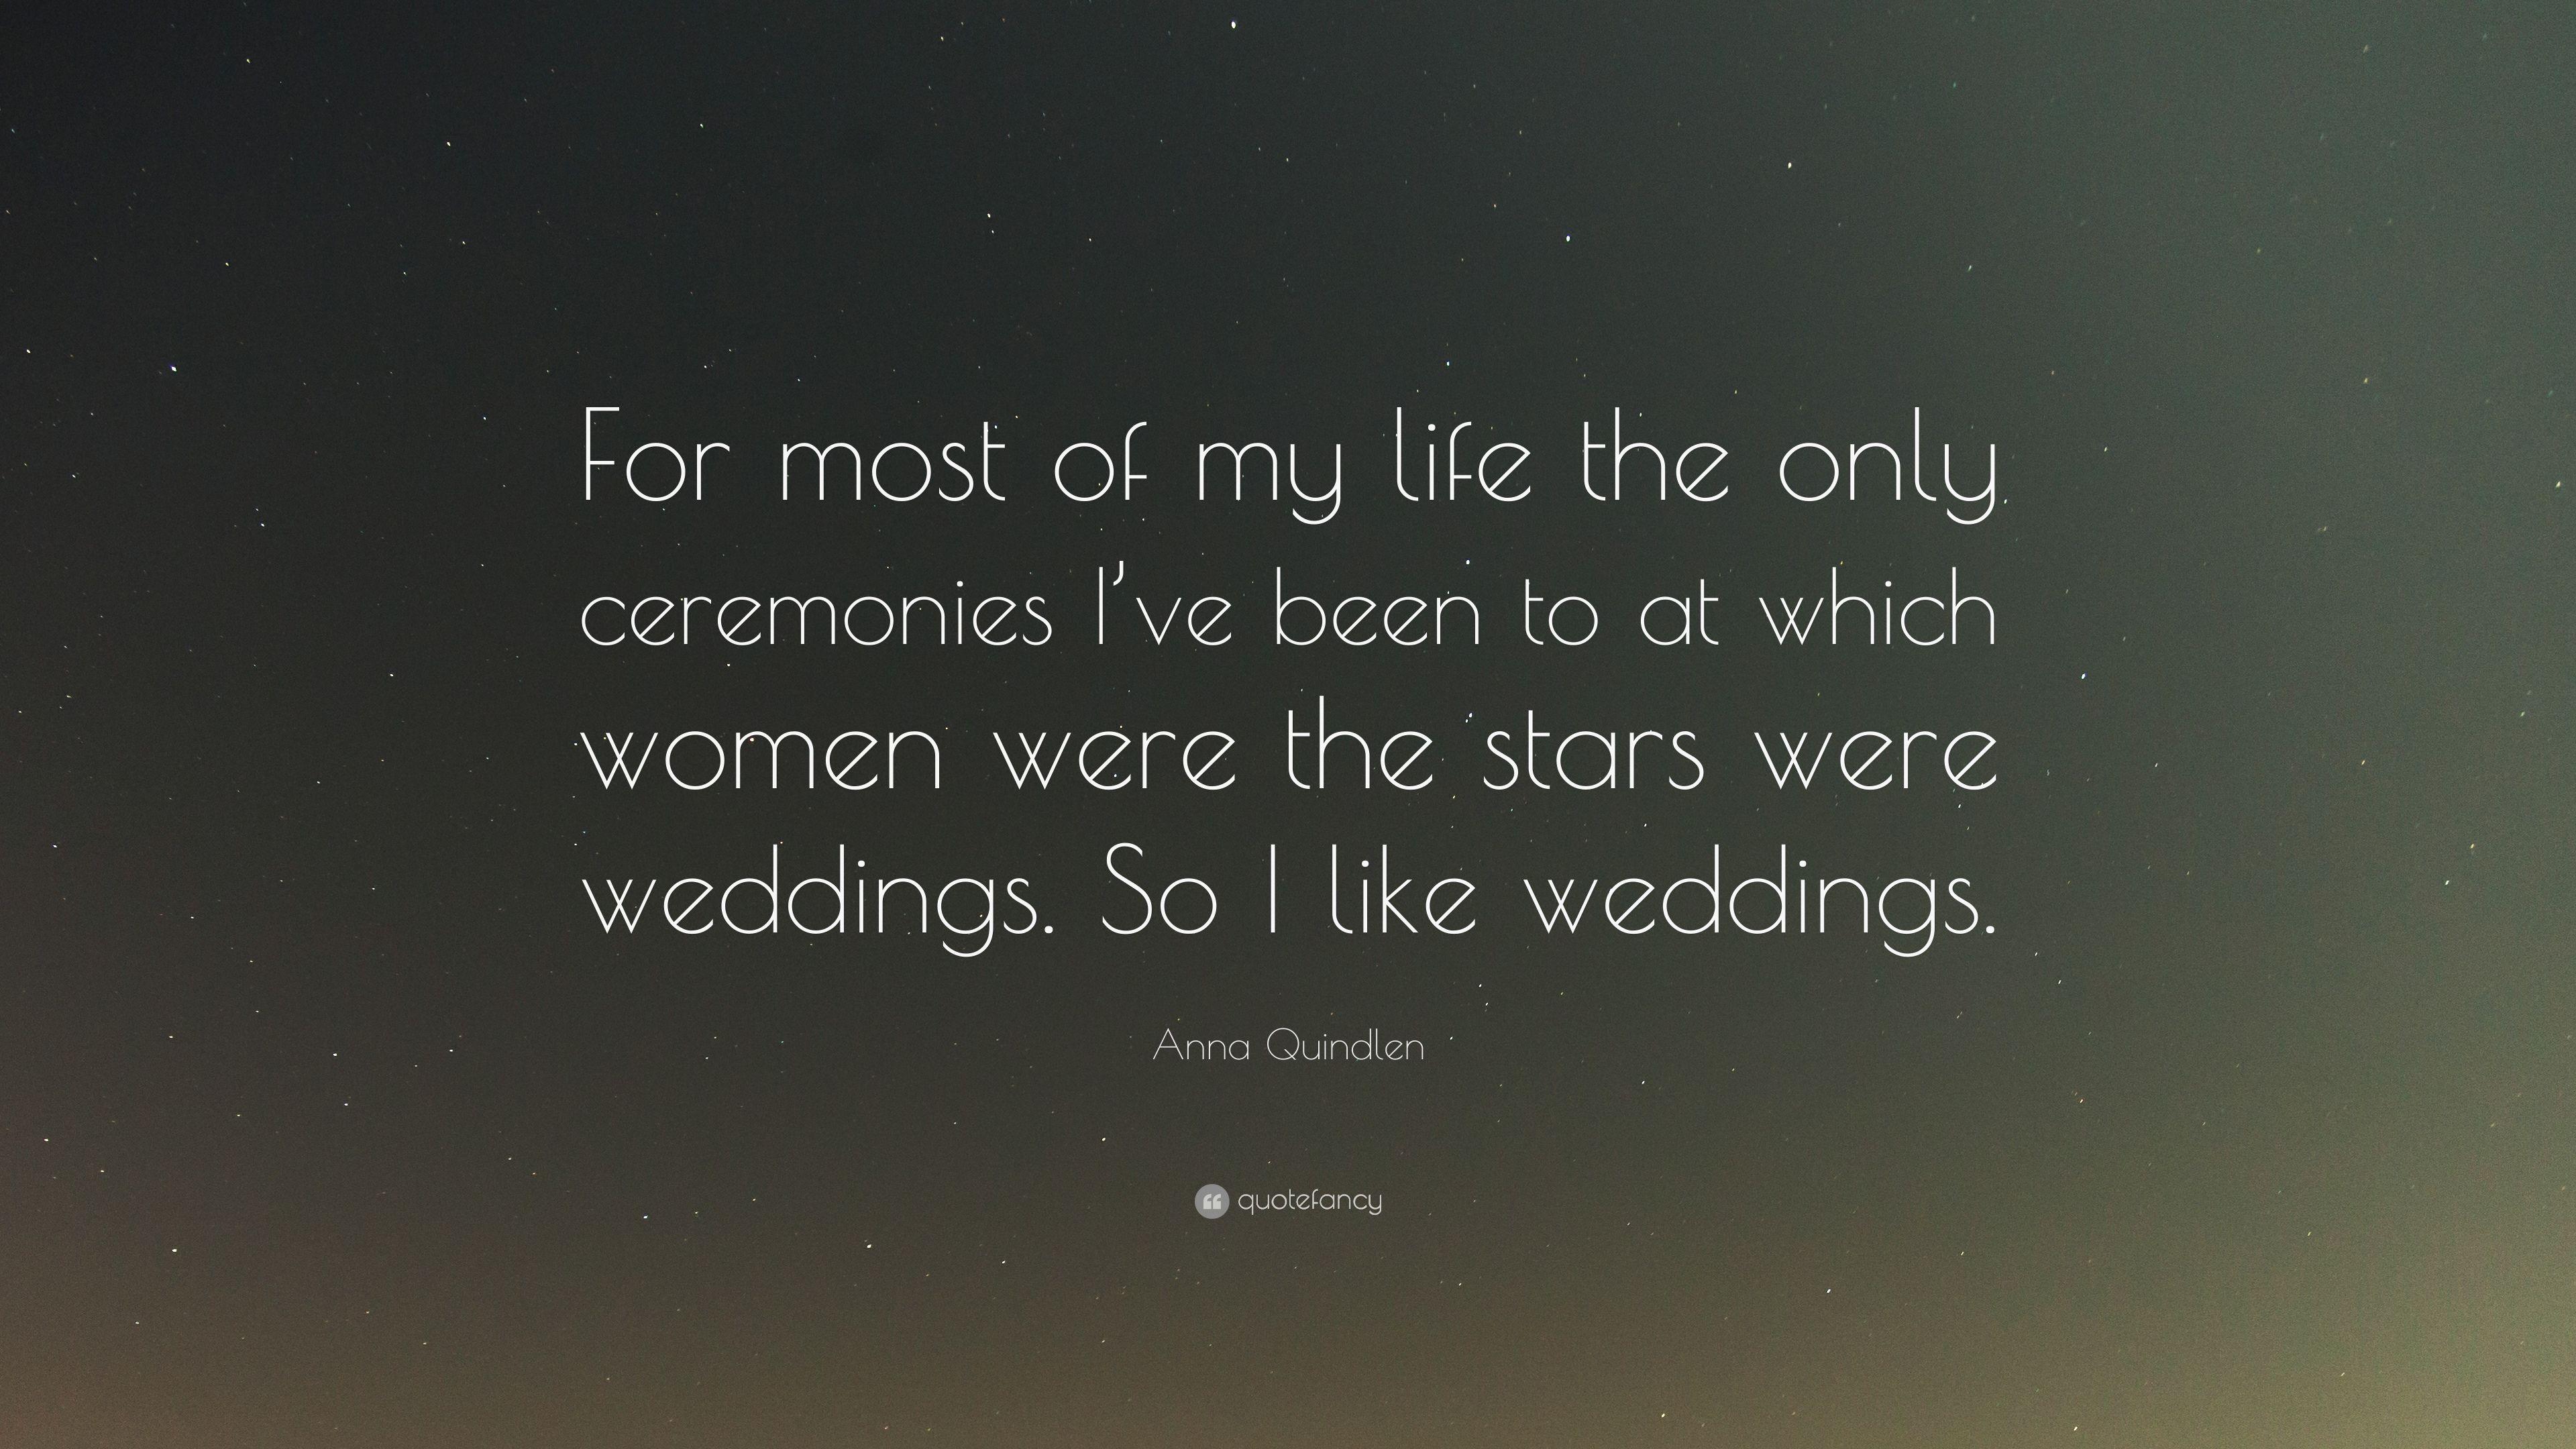 Anna Quindlen Quote: “For most of my life the only ceremonies I've